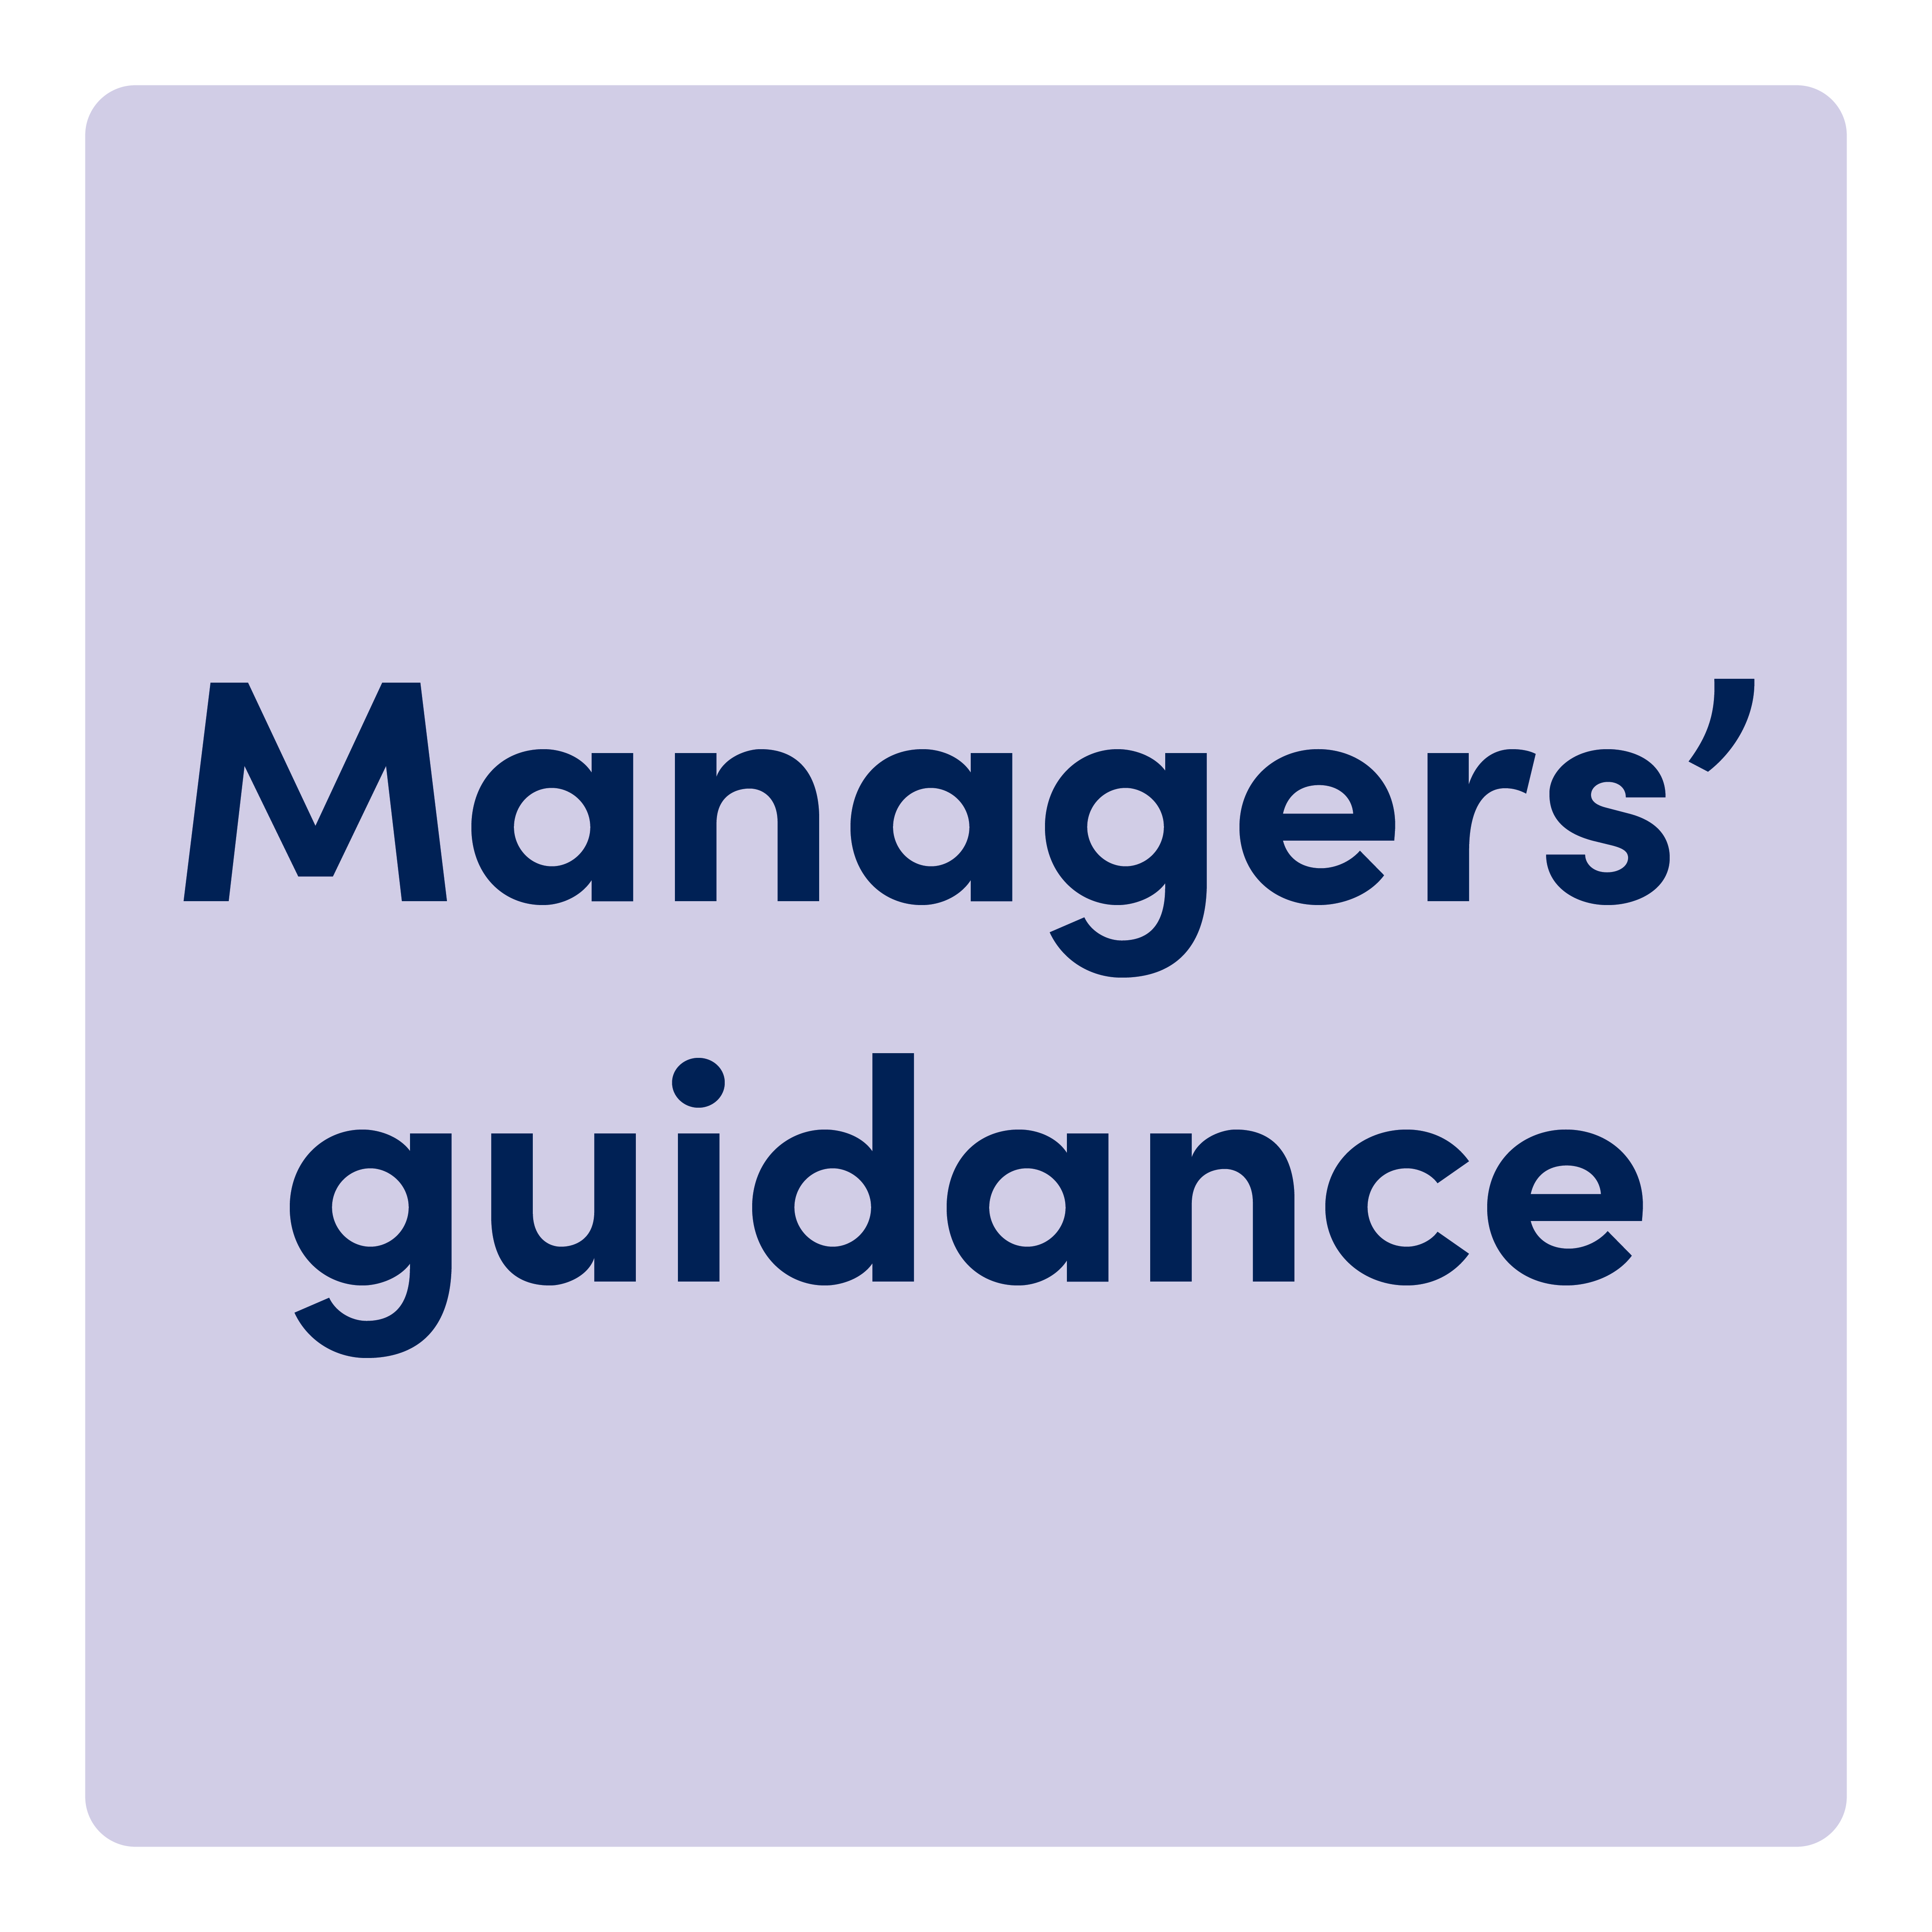 Managers' guidance